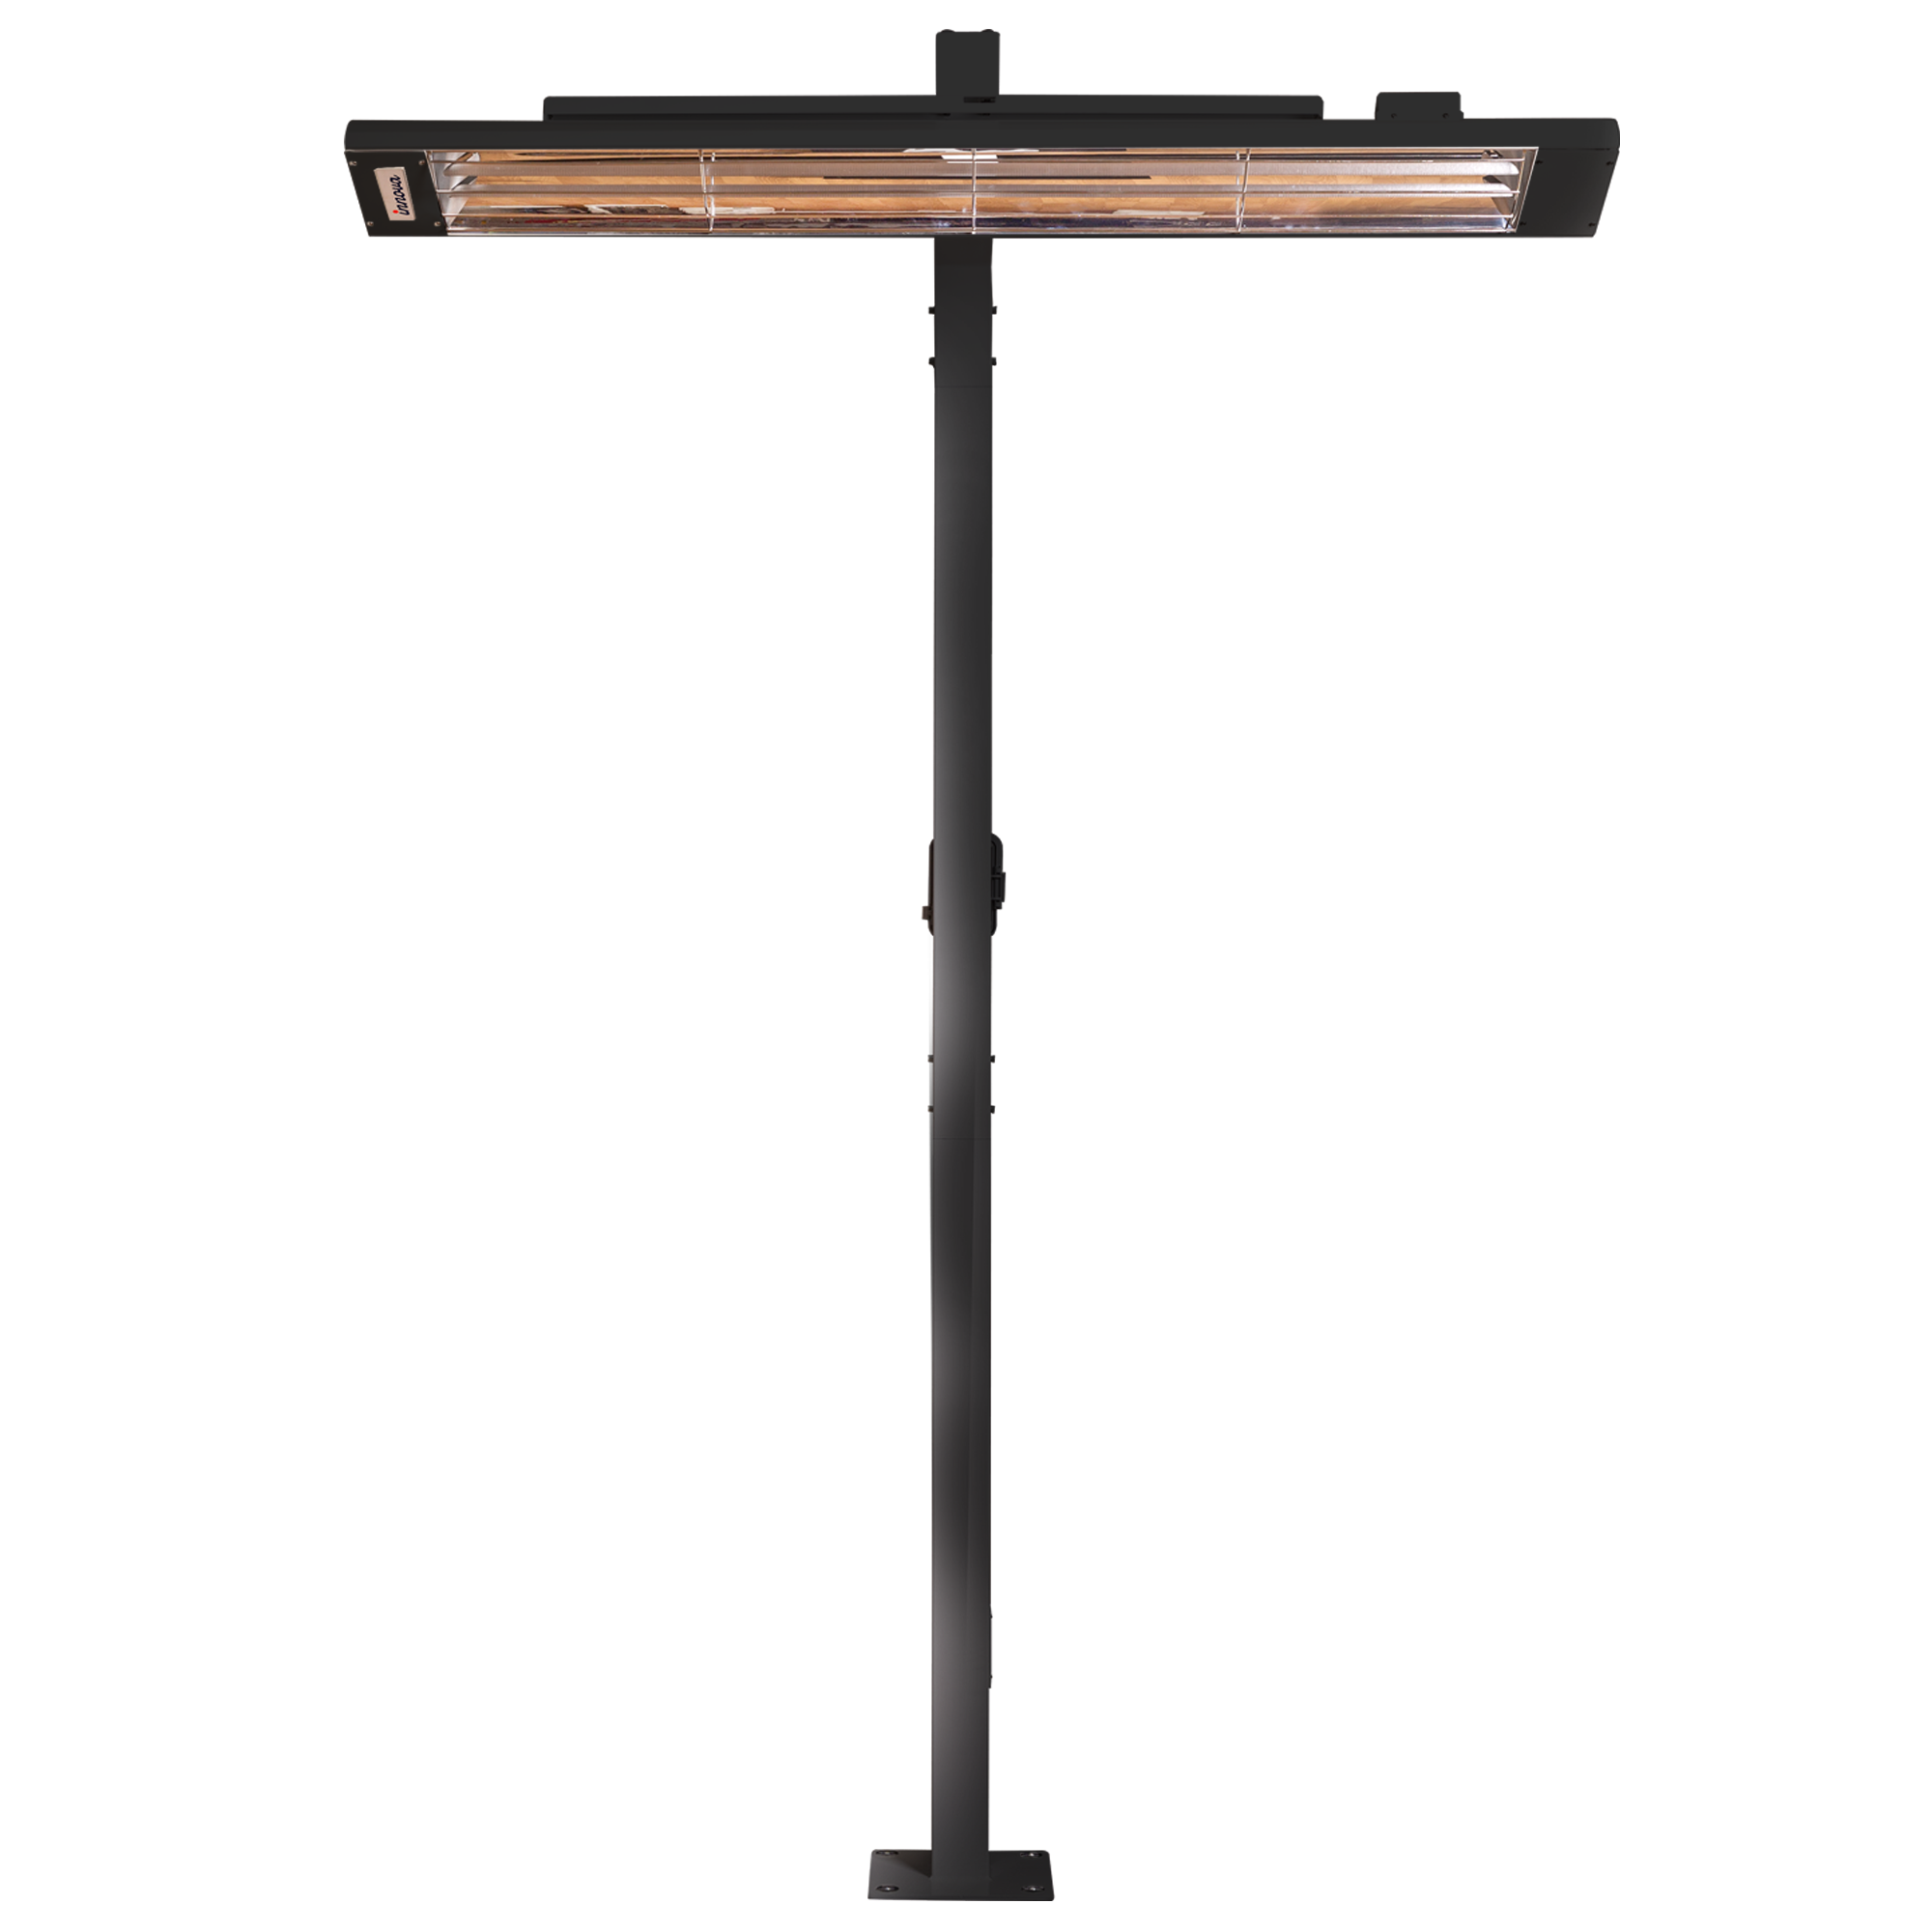 8ft Single Pole Mount For 4000W and 5000W Heaters